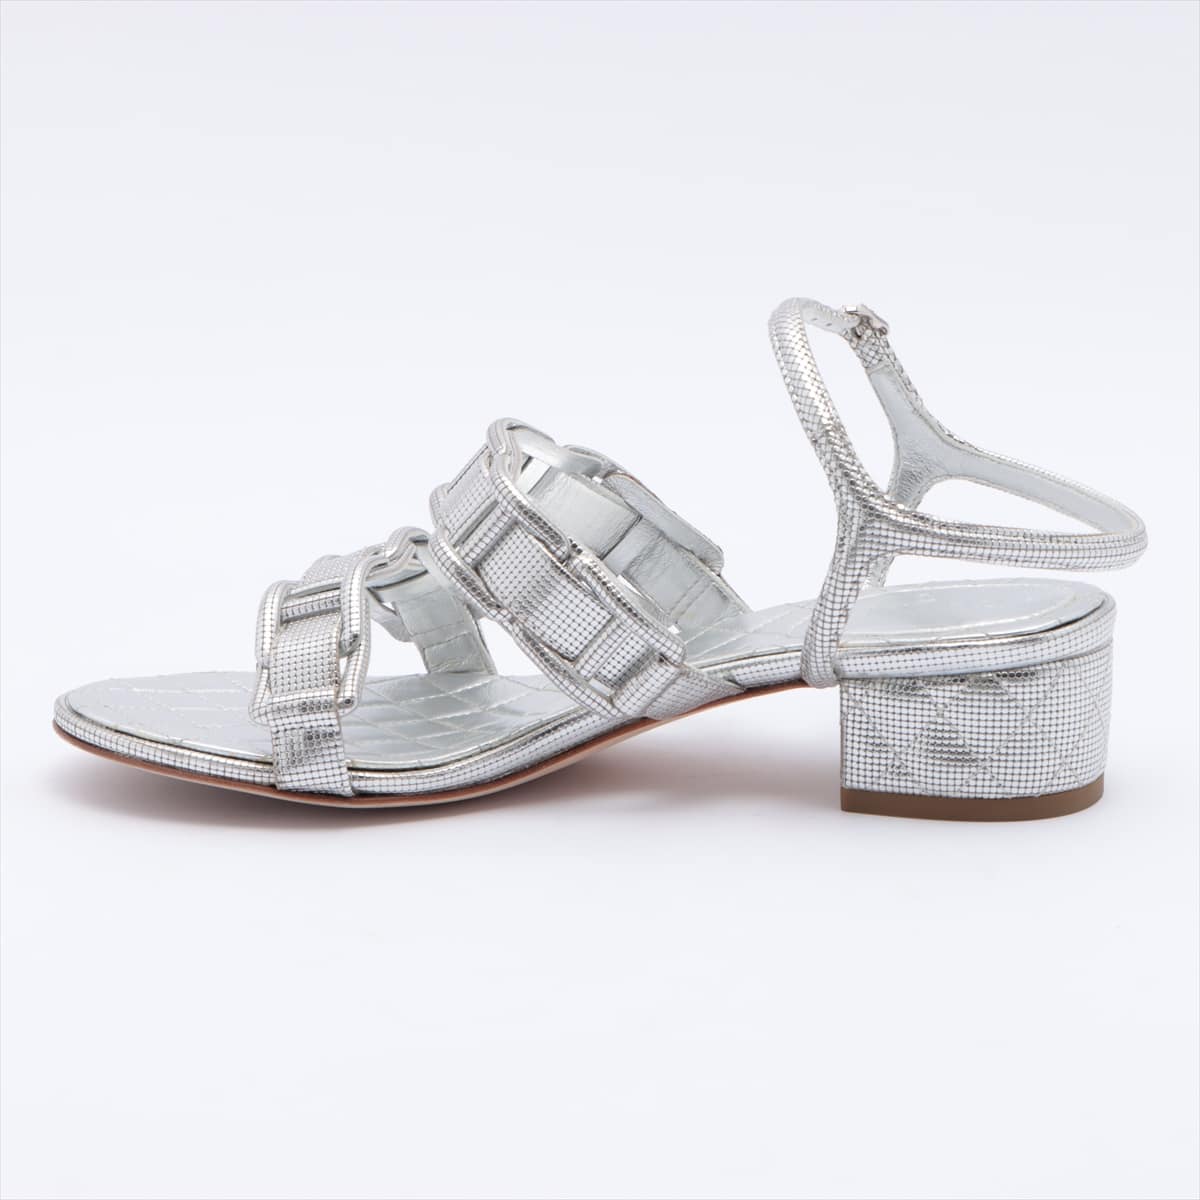 Chanel Coco Mark Metallic Leather Sandals 36.5 Ladies' Silver